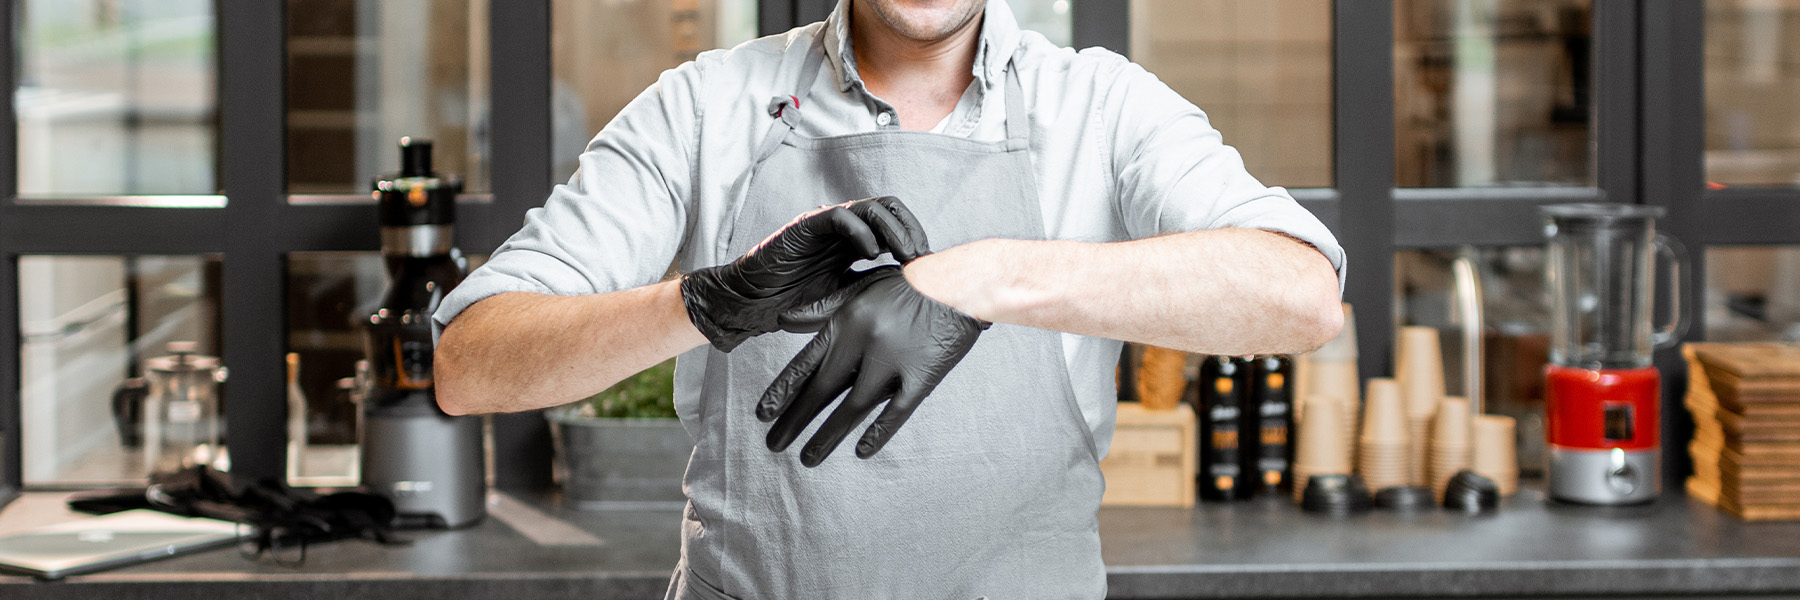 A male standing in a kitchen wearing black gloves